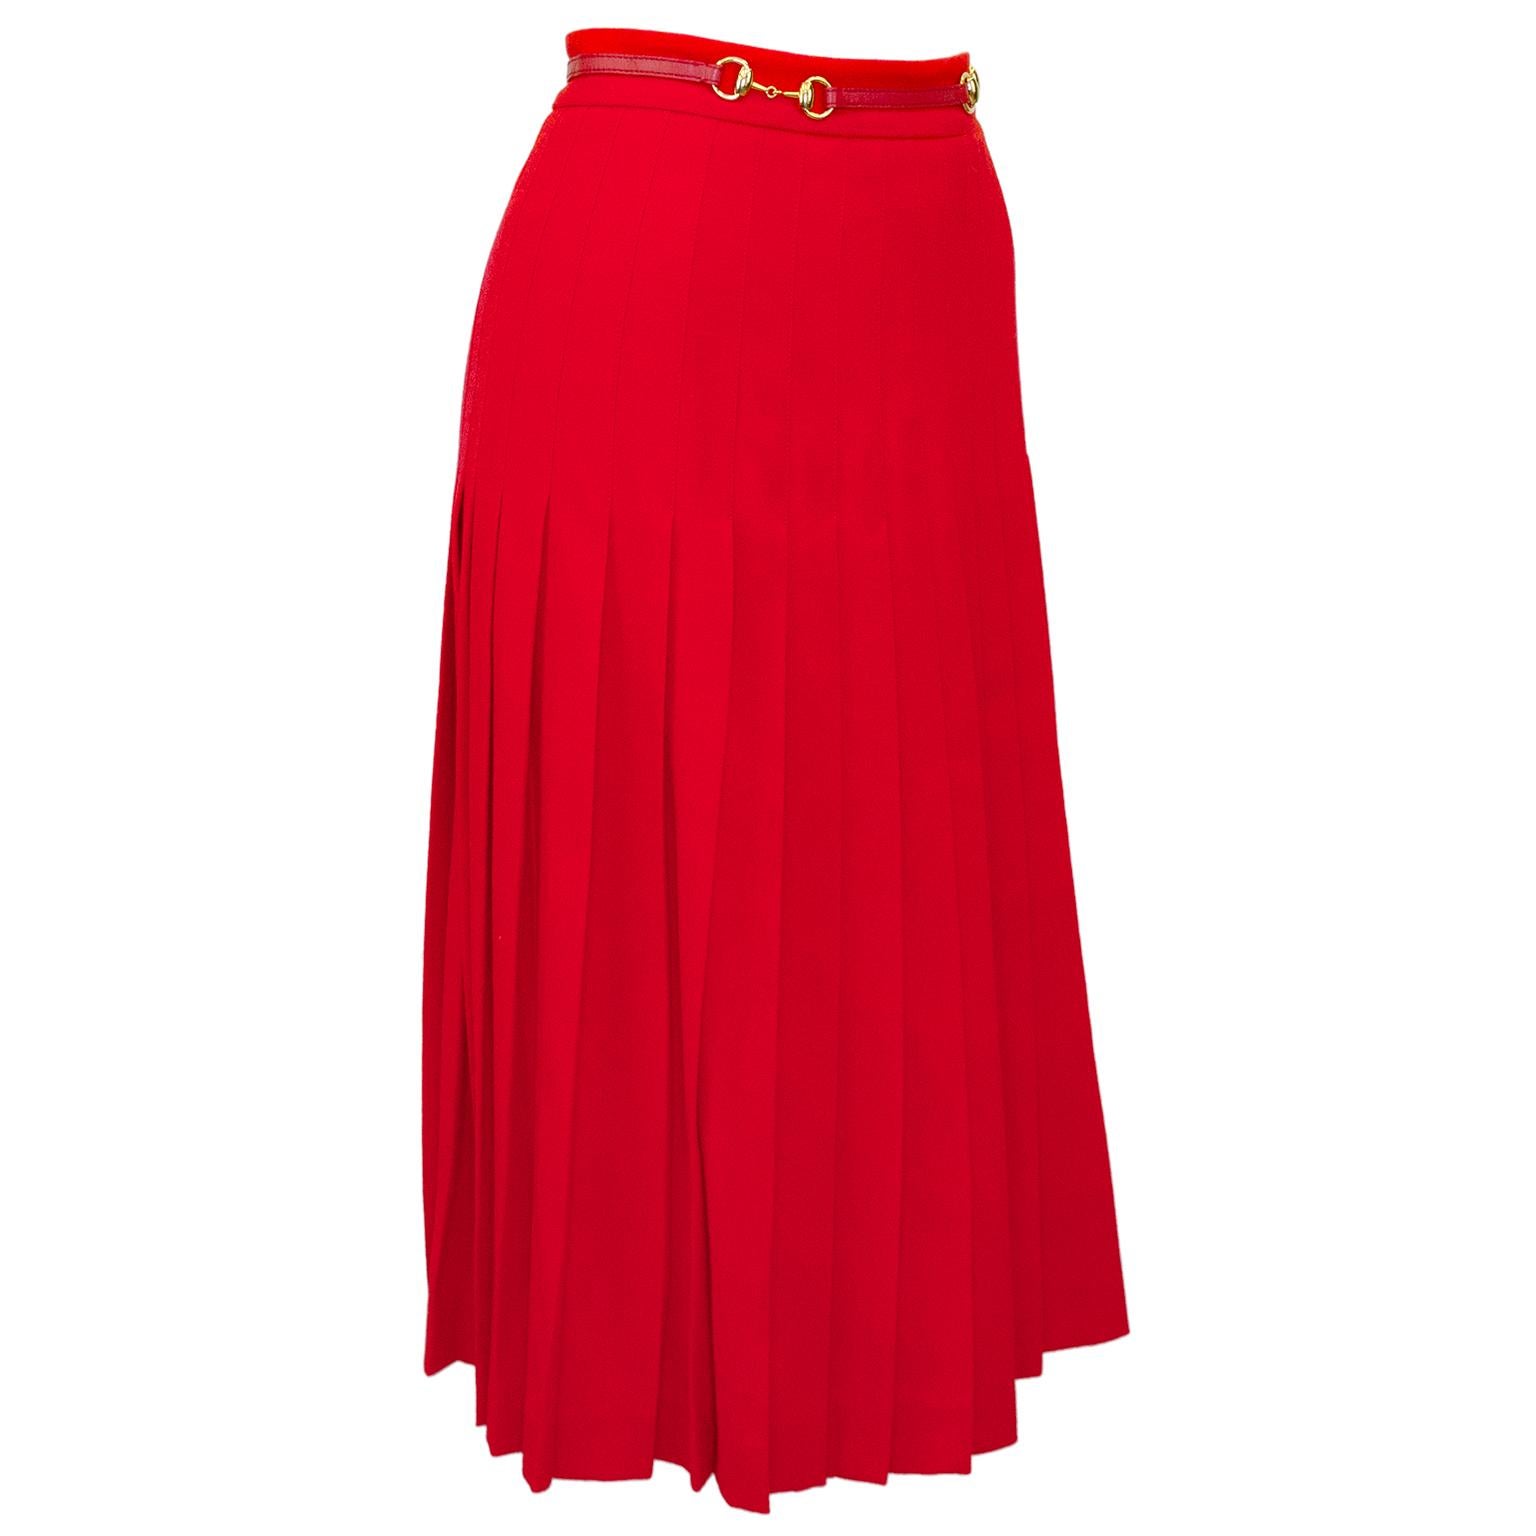 Gucci by Alessandro Michele 1970s inspired red wool skirt. High waisted with inverted pleats and a thin attached red leather belt. Belt is embellished with gold metal horse bits, a motif that dates back to the inception of the Gucci brand. Zipper